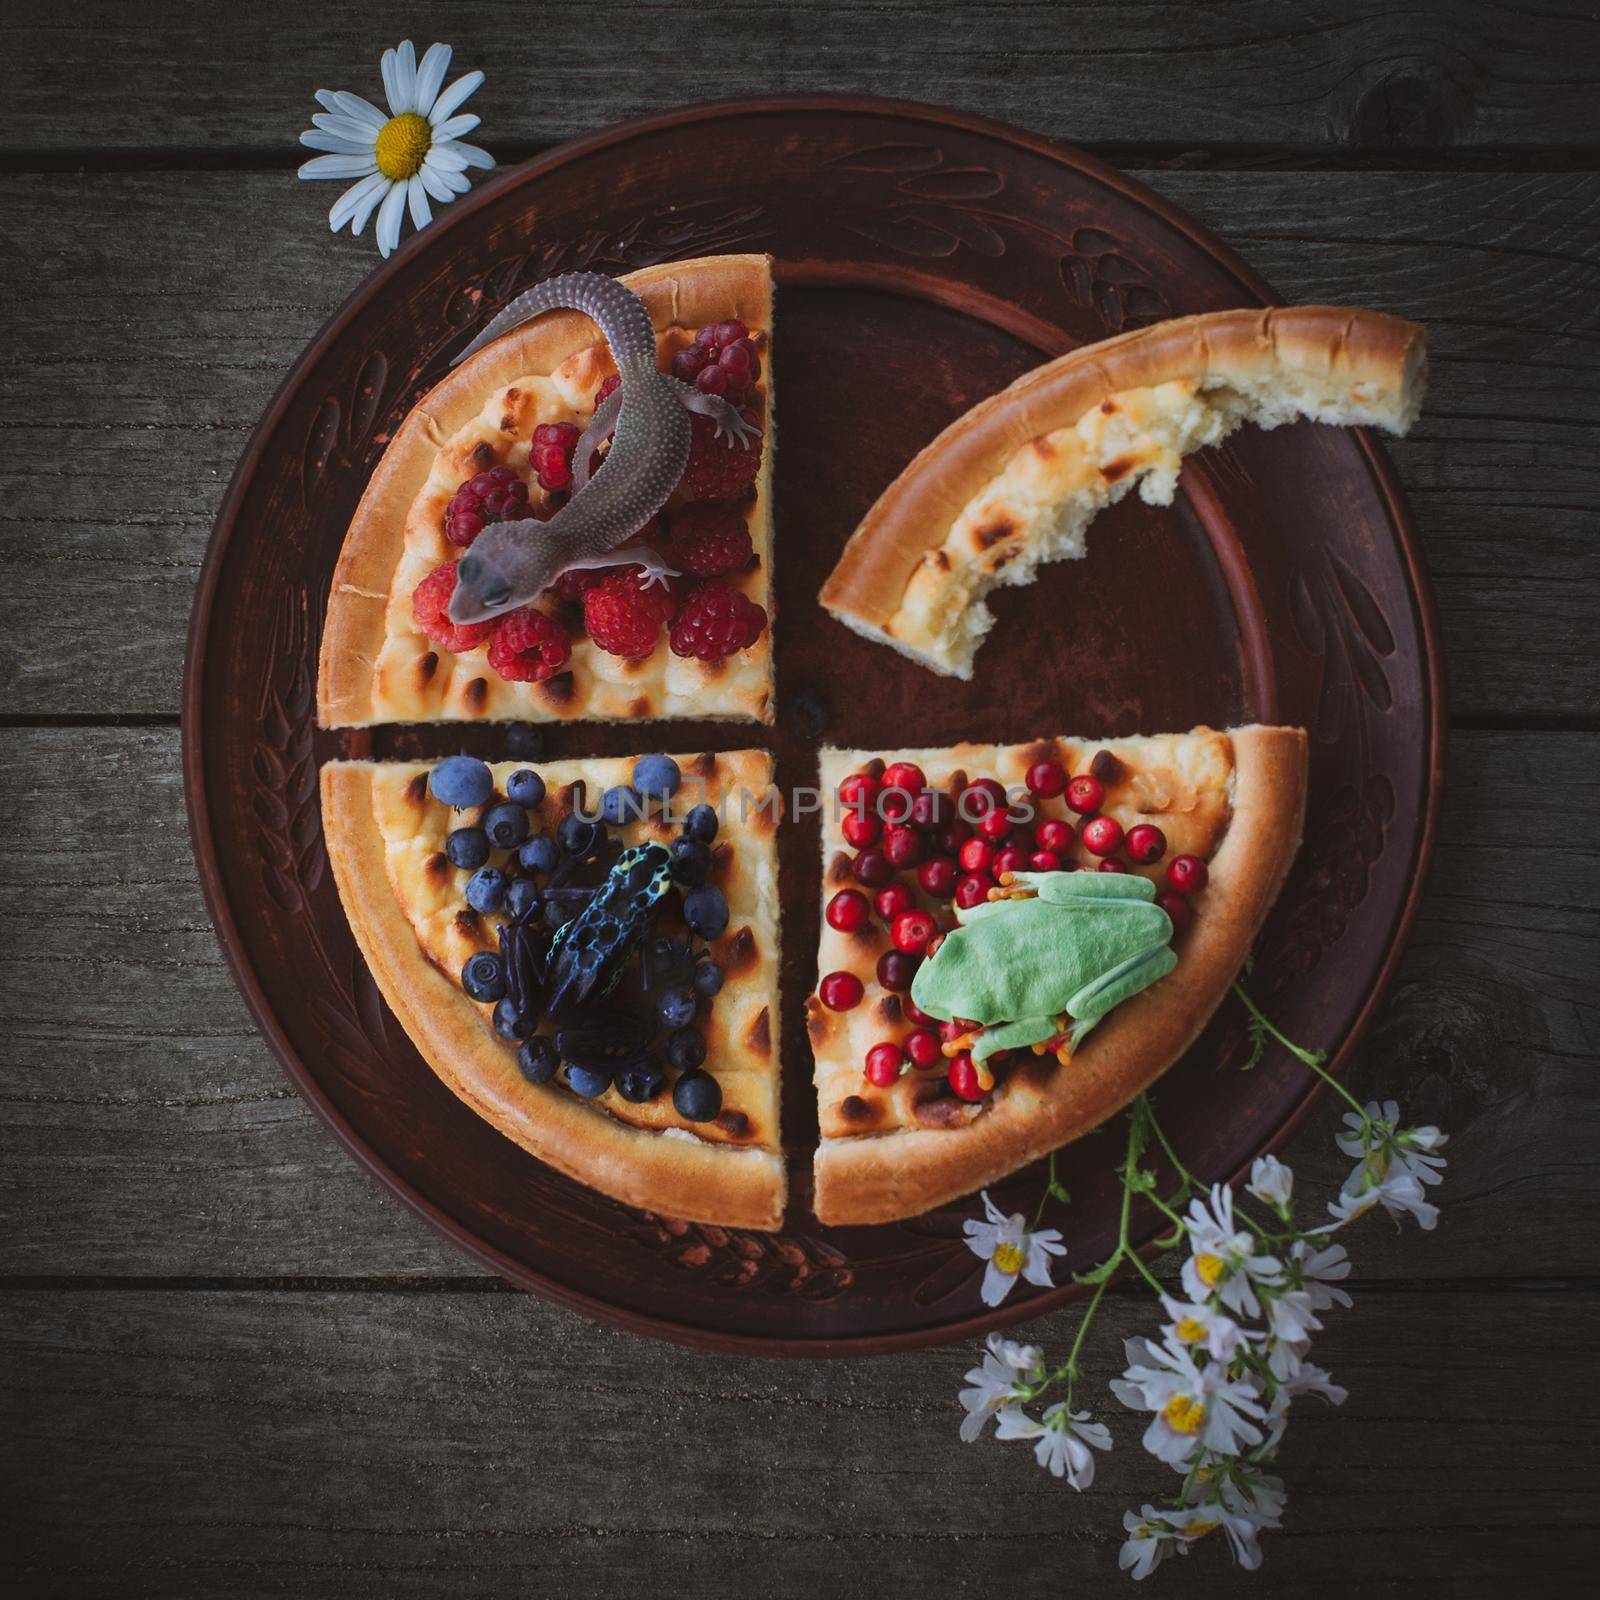 Reptile and amphibian pets Homemade cheesecake Pie with berries and flowers On plate on Wooden Background